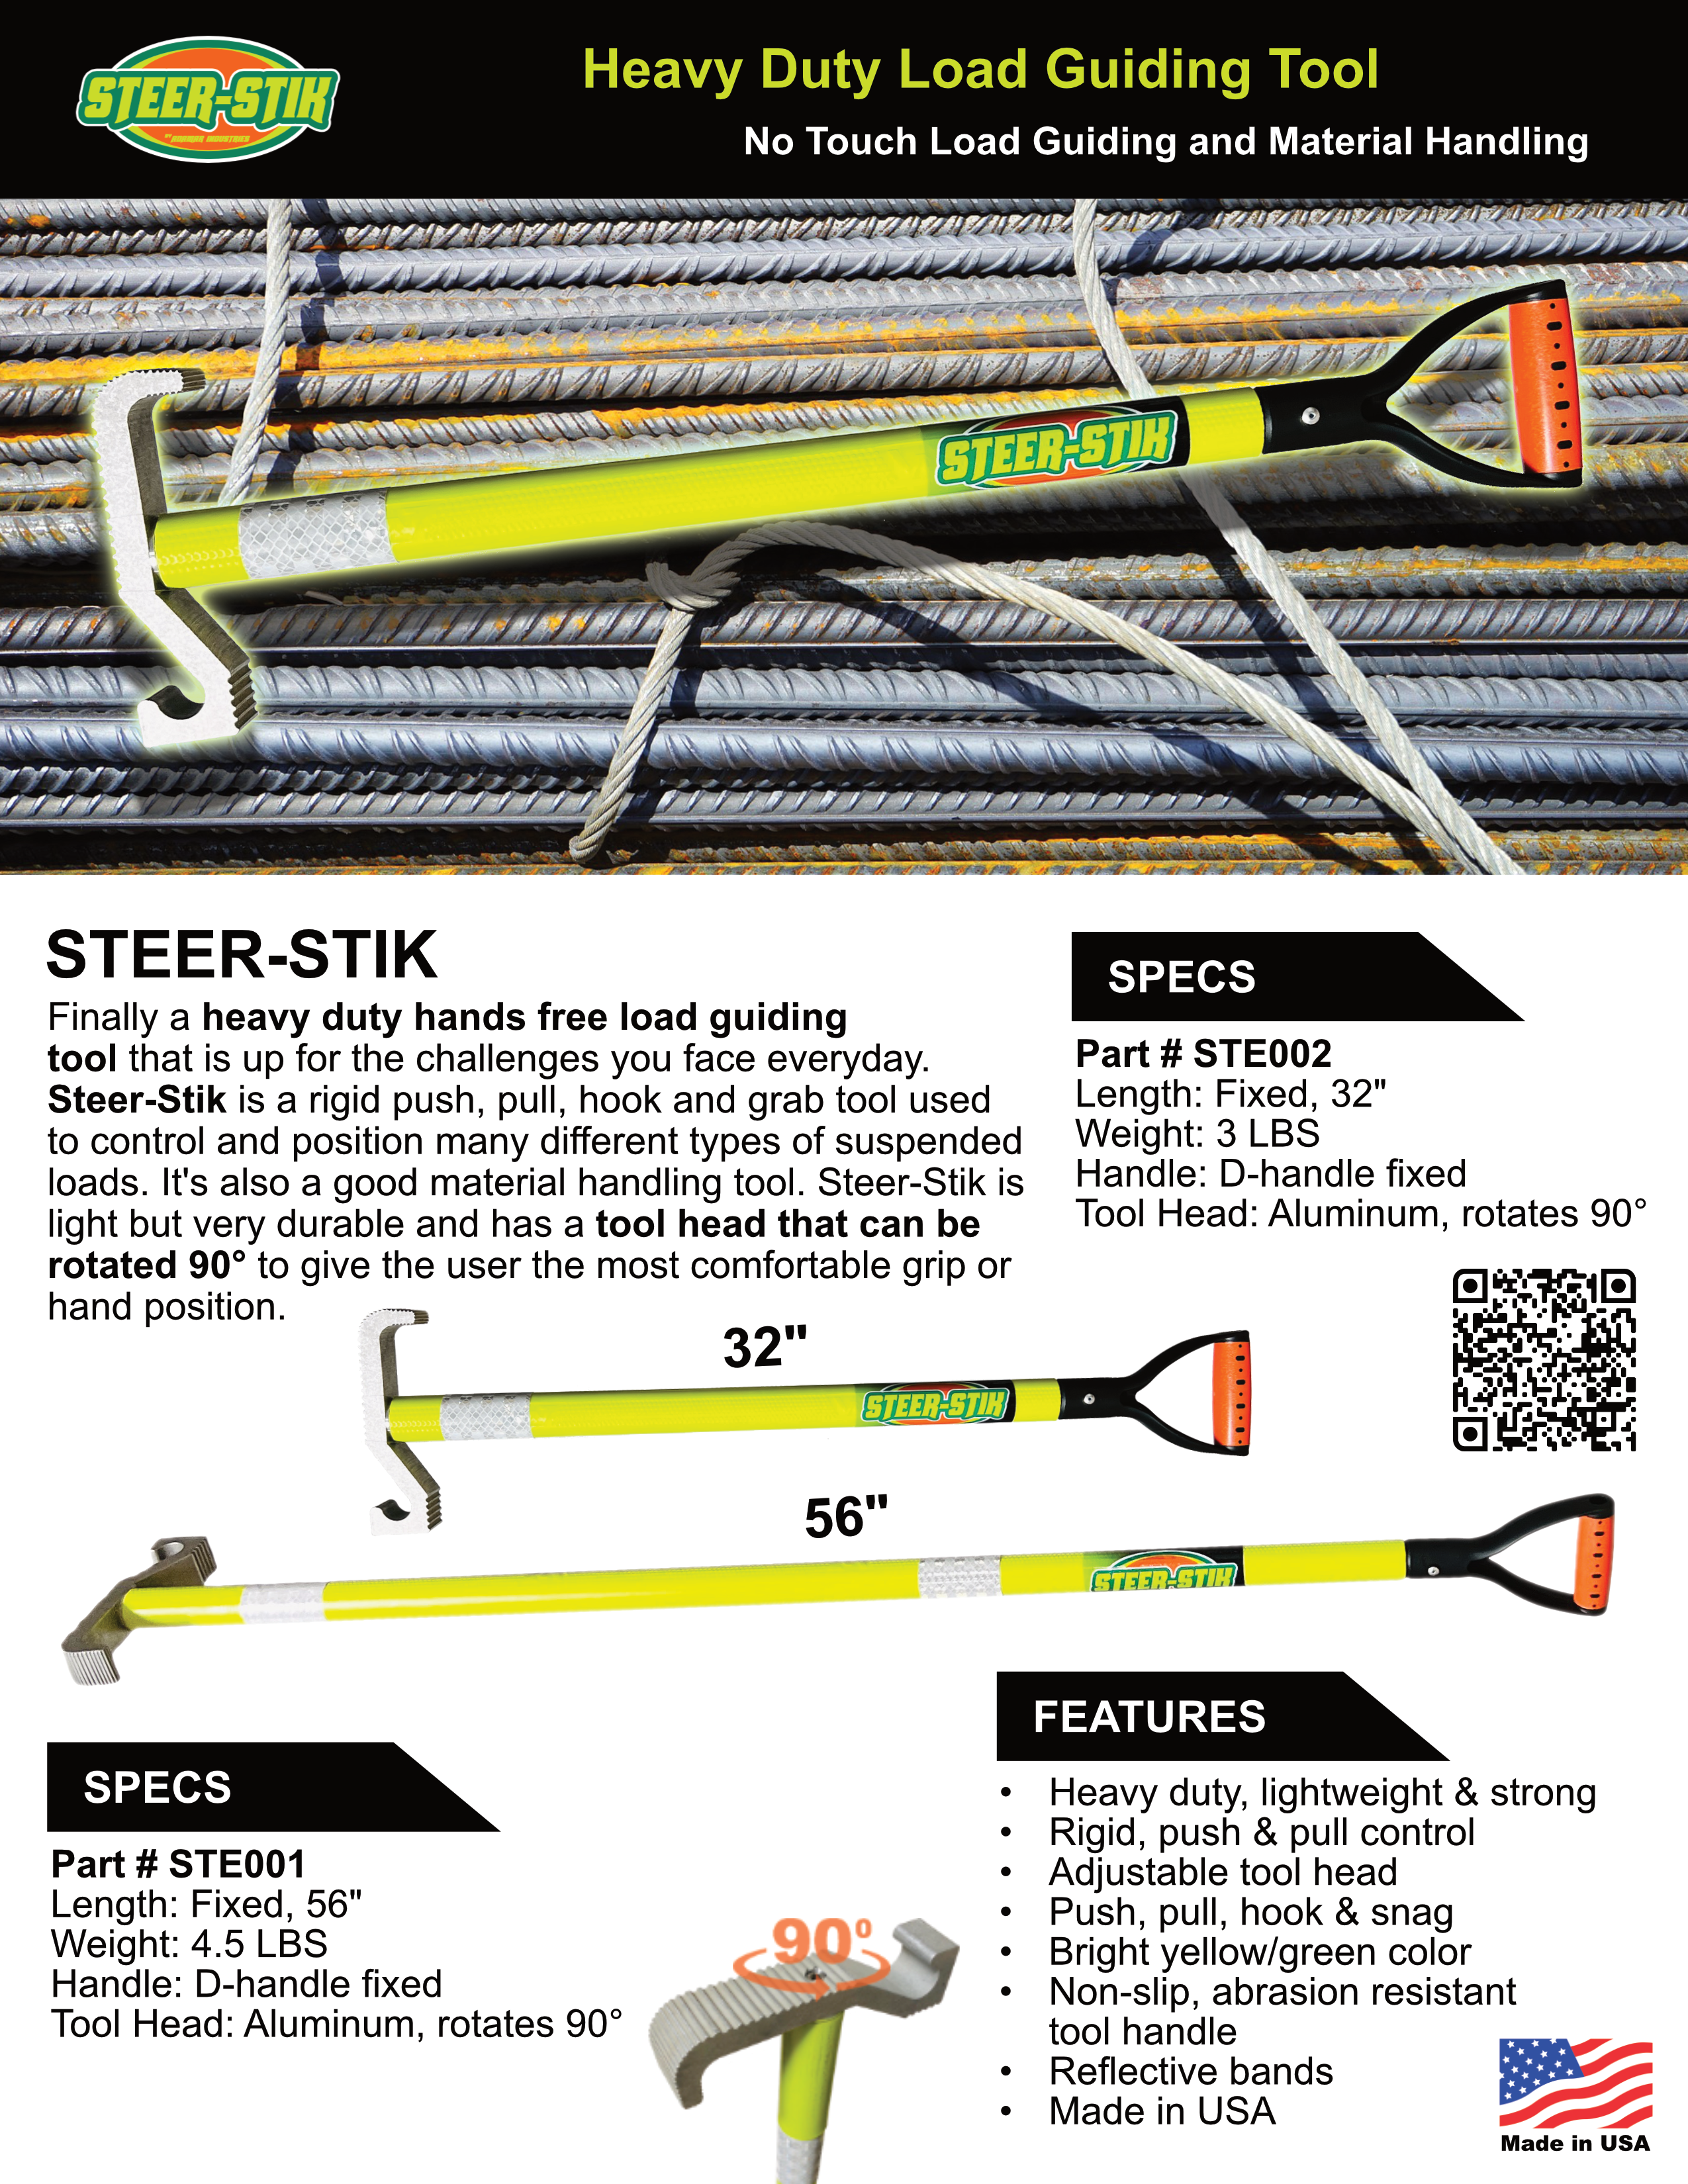 STEER-STIK Hands free load guider - Heavy duty push pull load guiding  safety tool. Hands off suspended load control. Material handling tools.  Push and pull control of suspended loads.